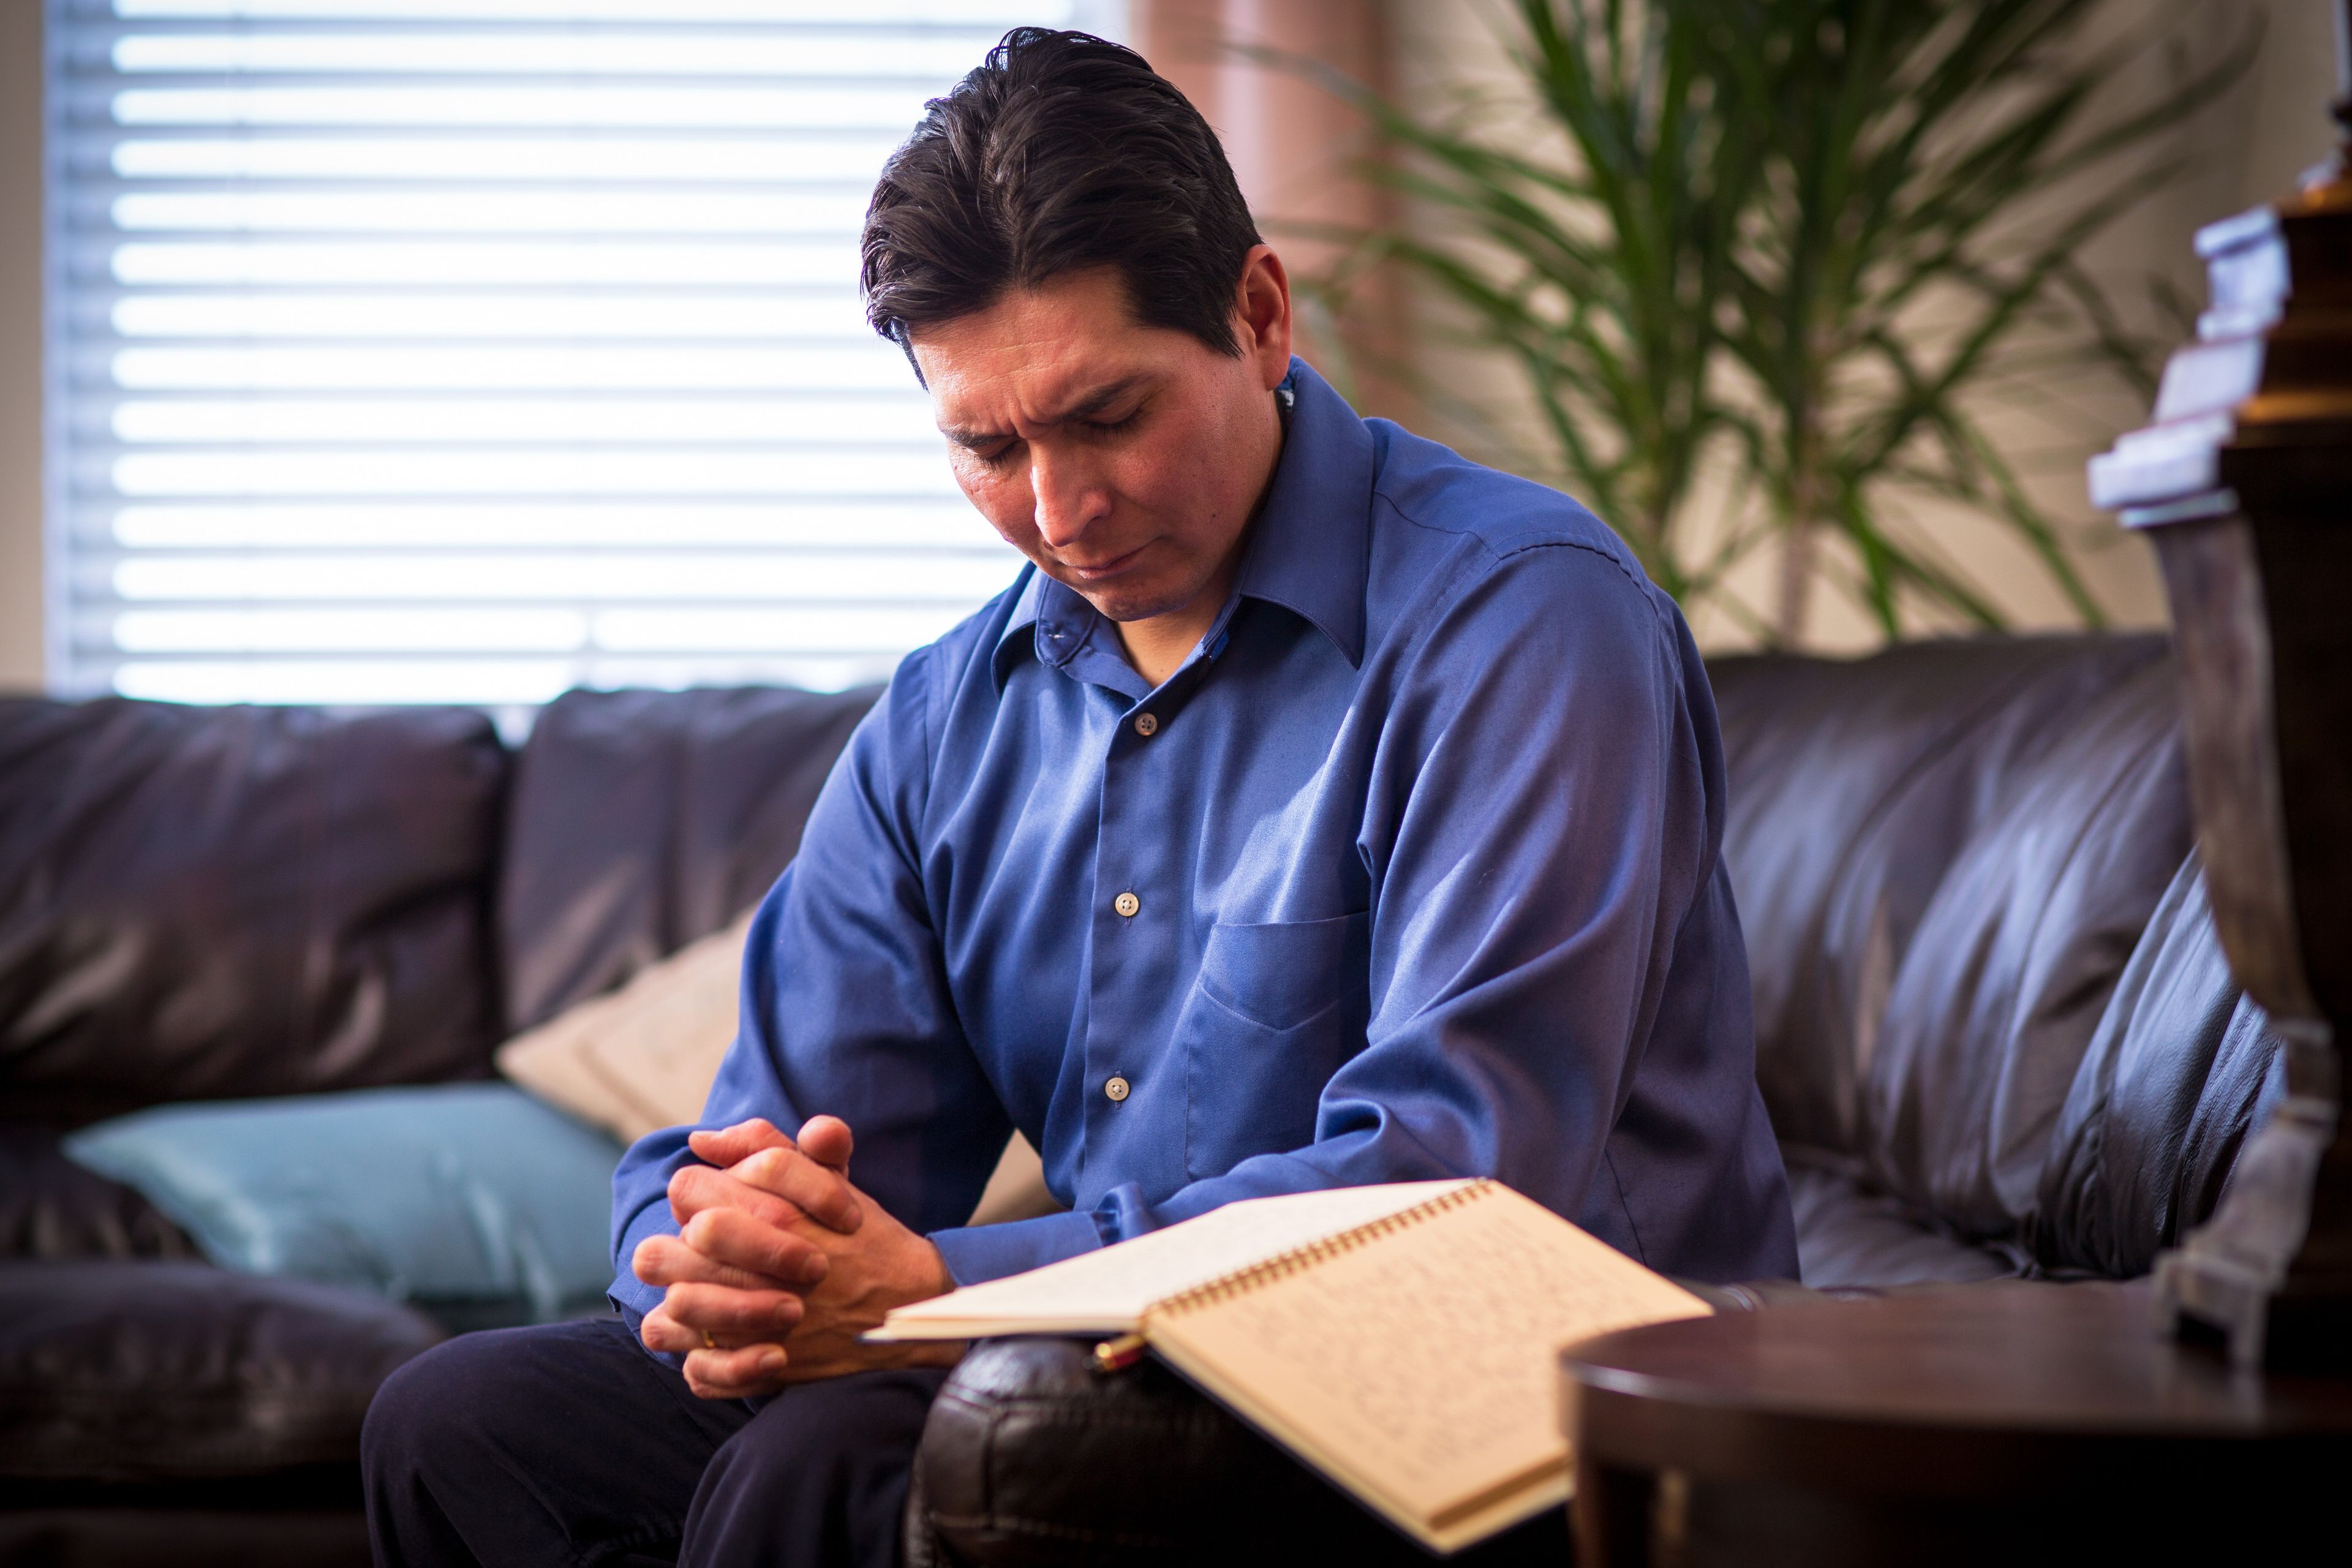 A man prays after writing in his journal.